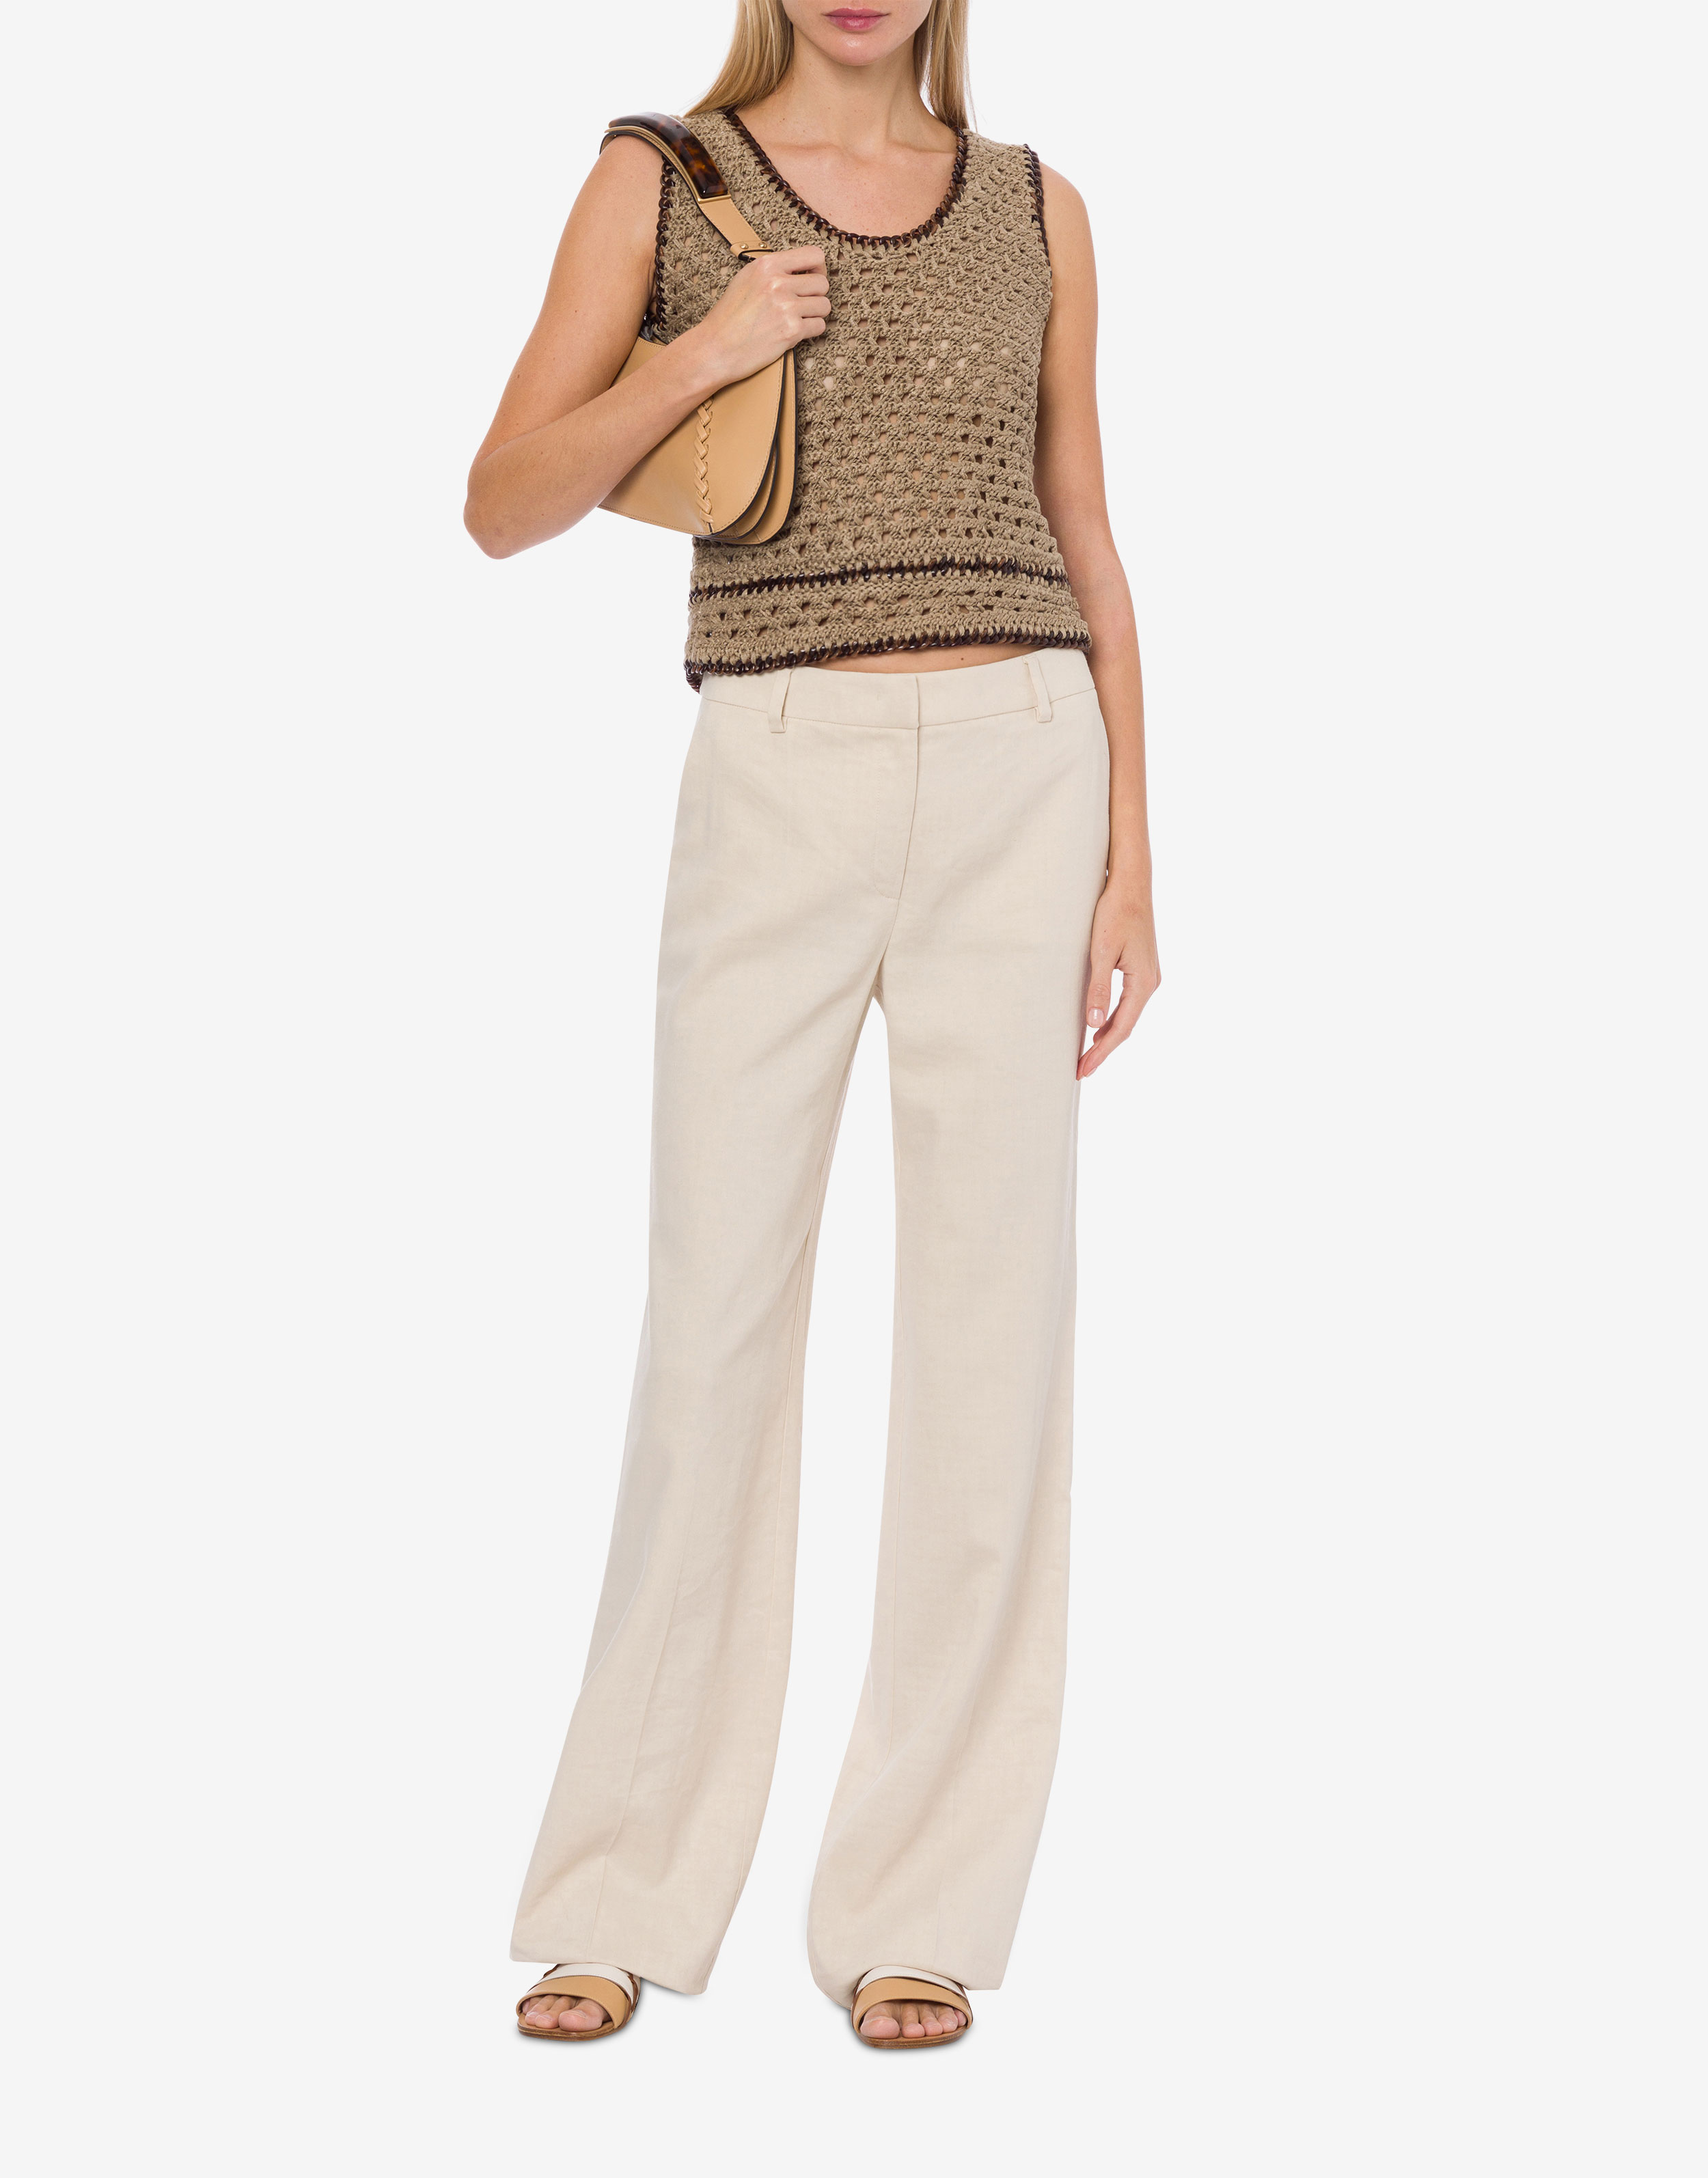 Tailored trousers in viscose twill and stretch linen